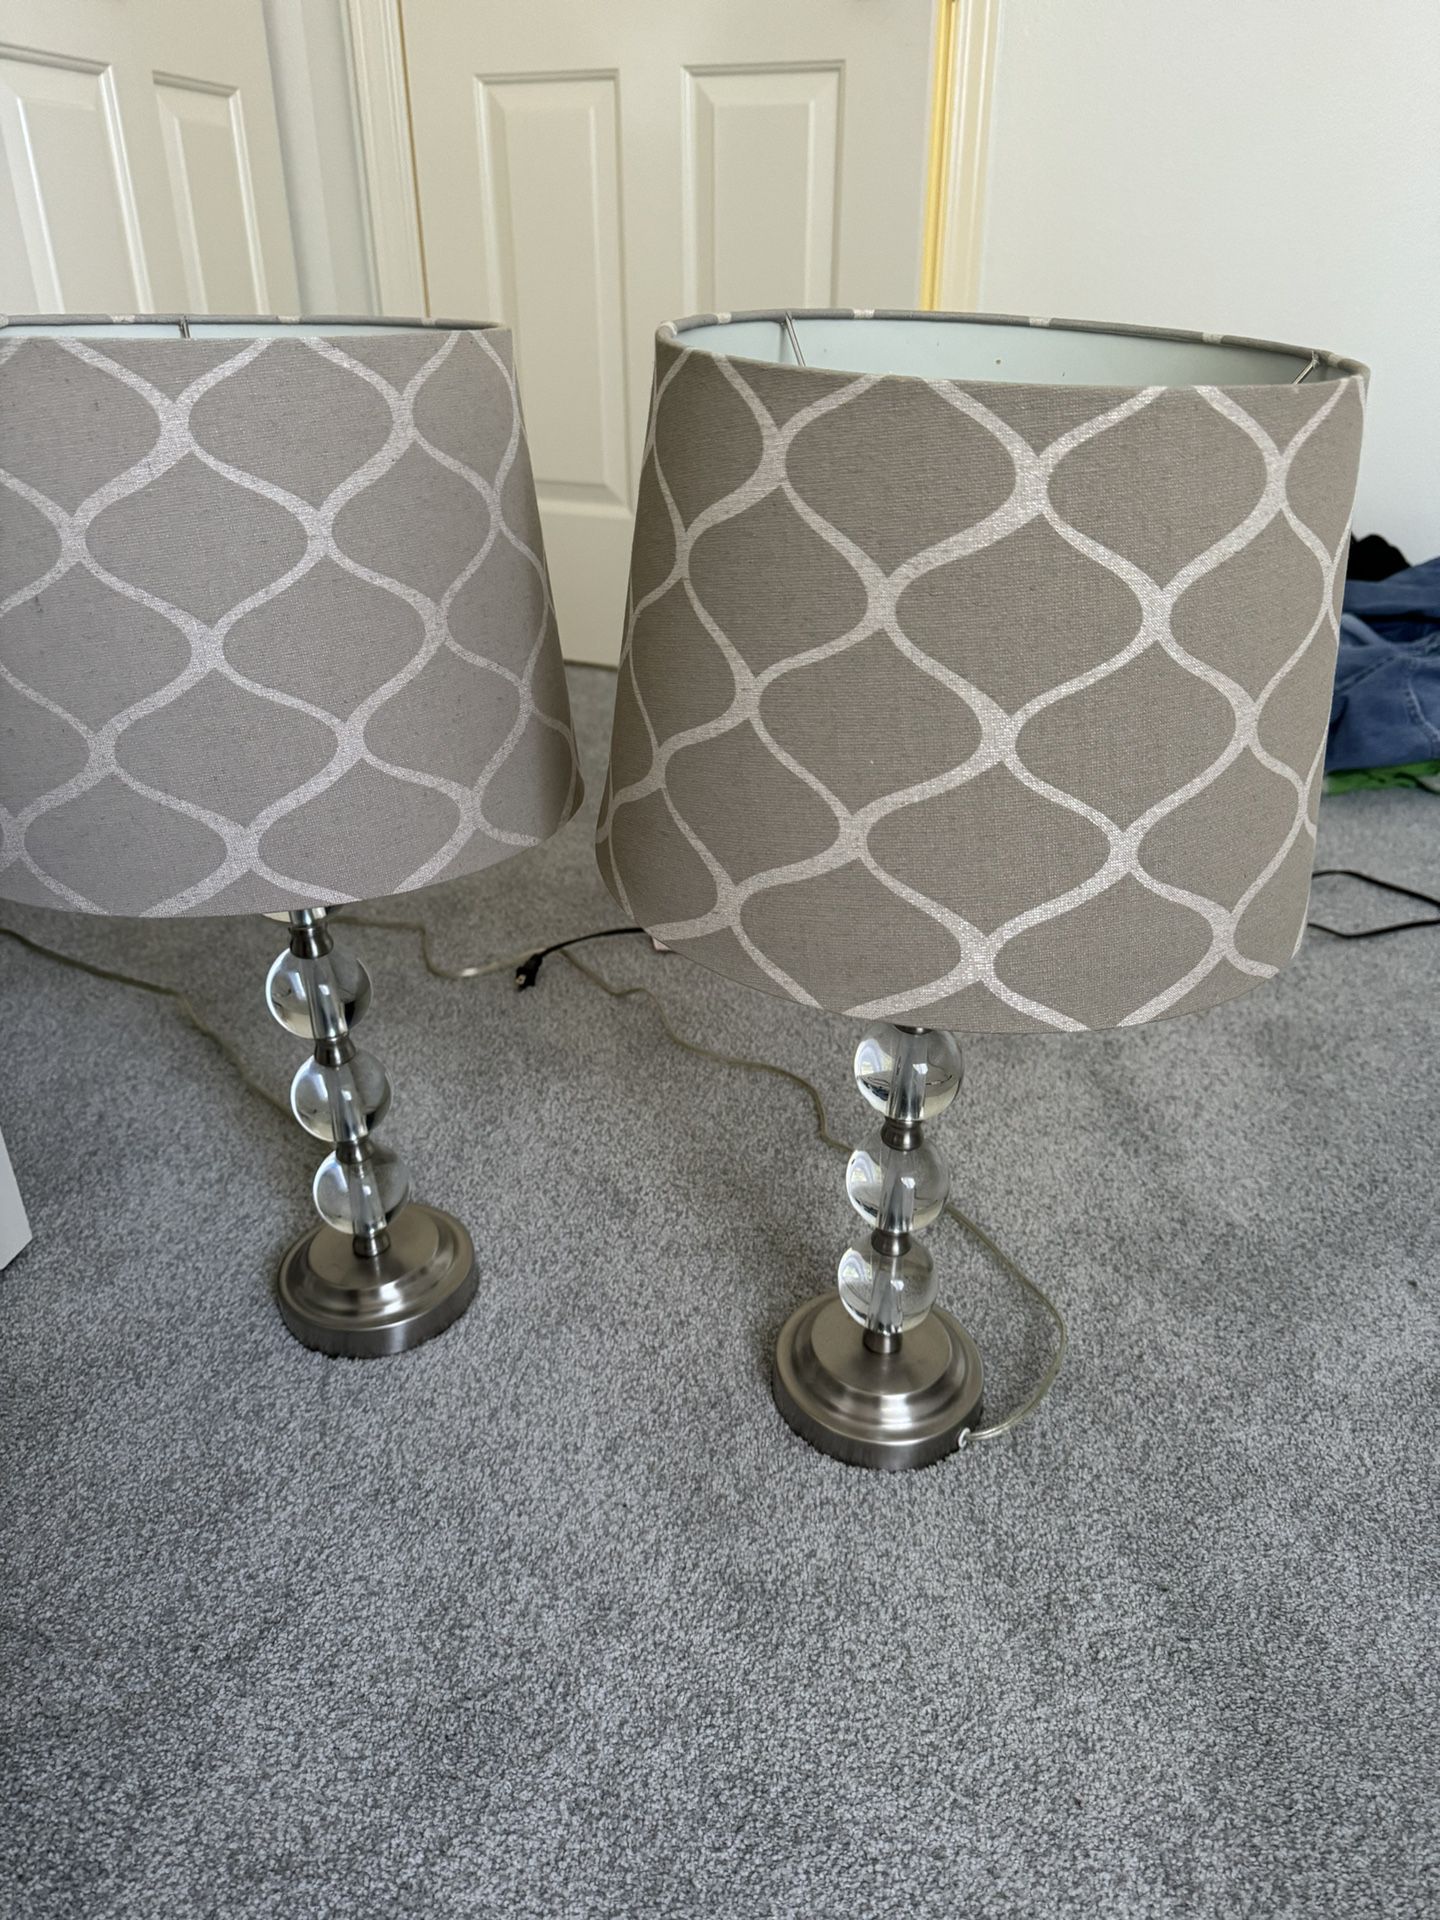 Identical Lamps